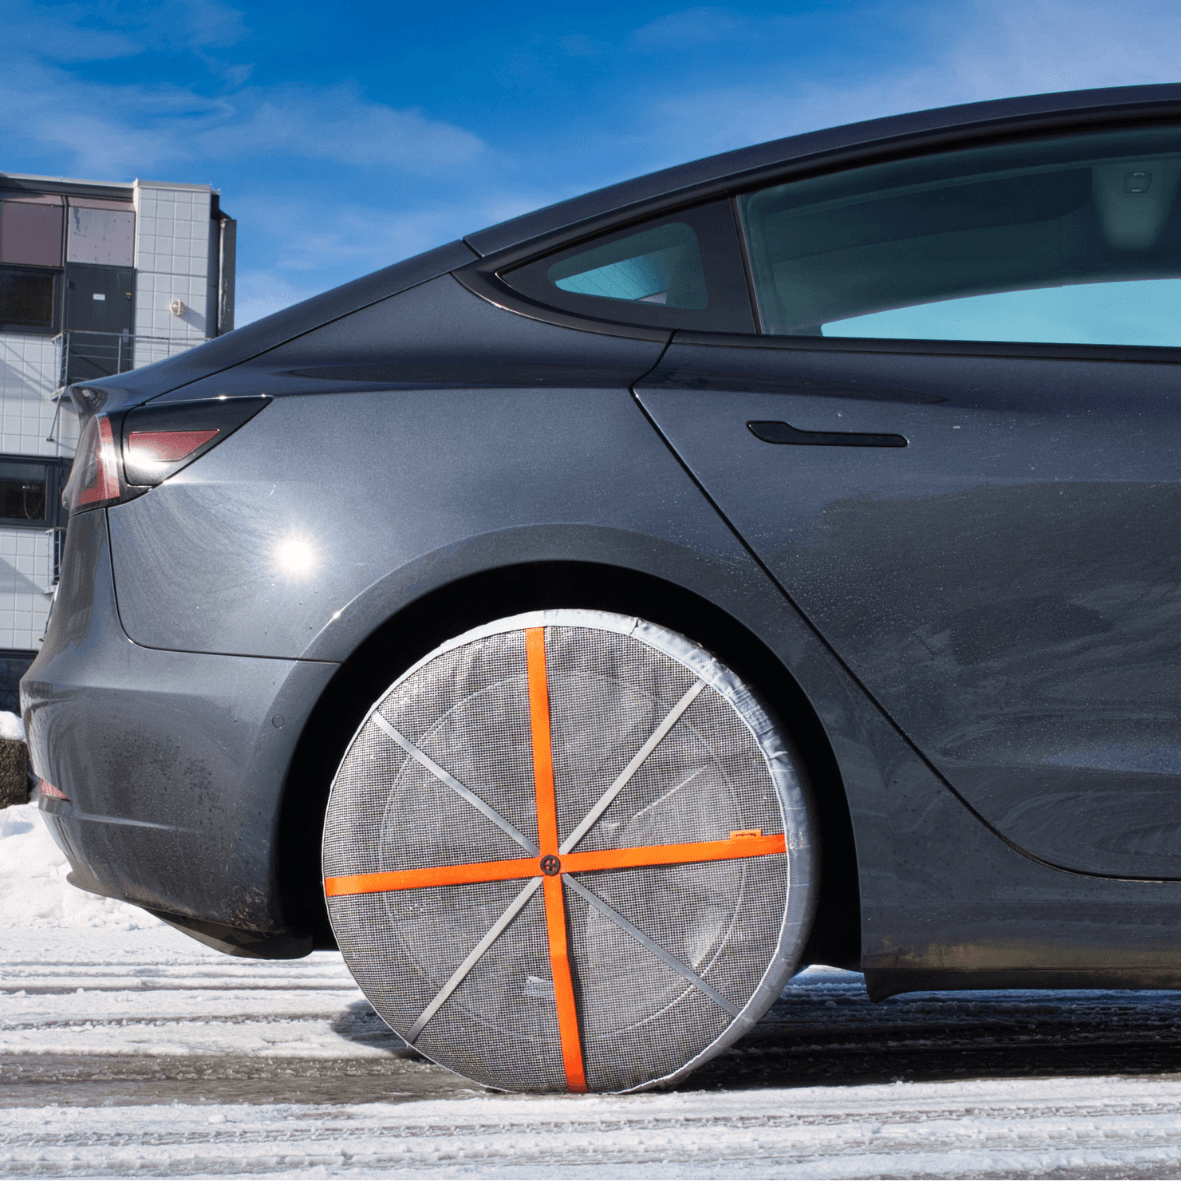 AutoSock HP for passenger cars mounted on rear wheels of a car on snow 